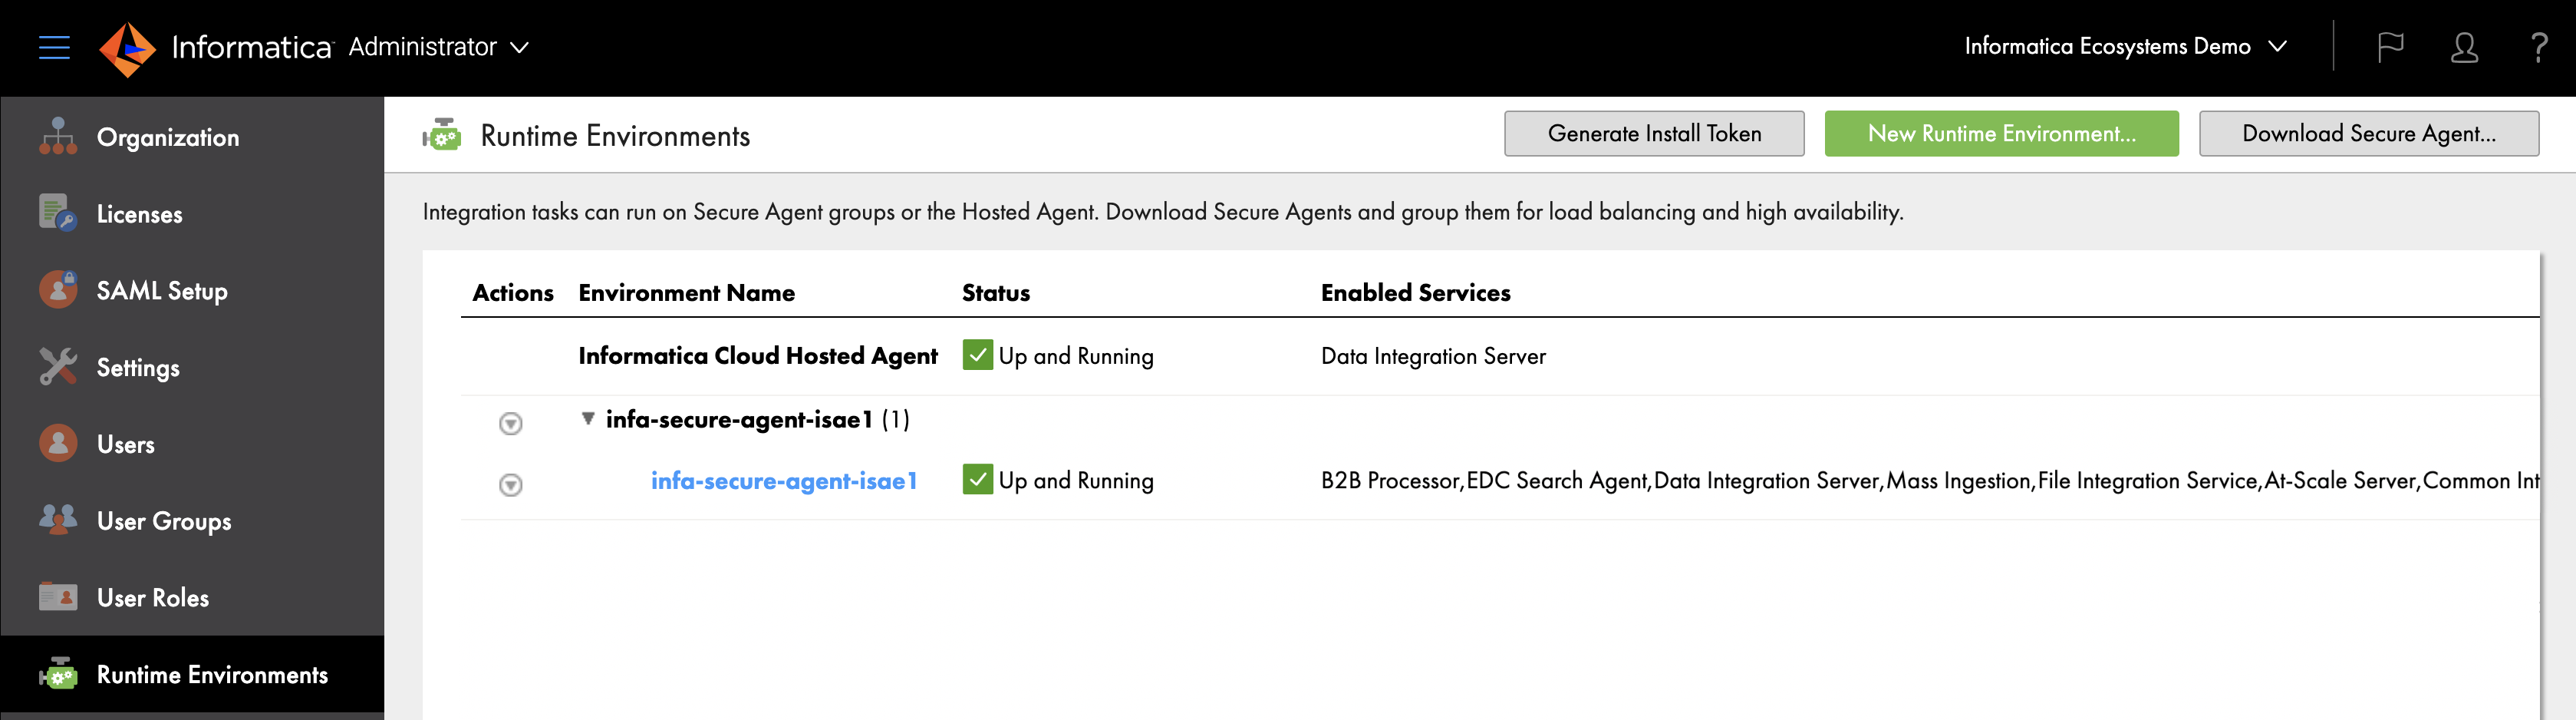 The Runtime Environments page in Administrator shows that the status of the new Secure Agent is "Up and Running." 
				  